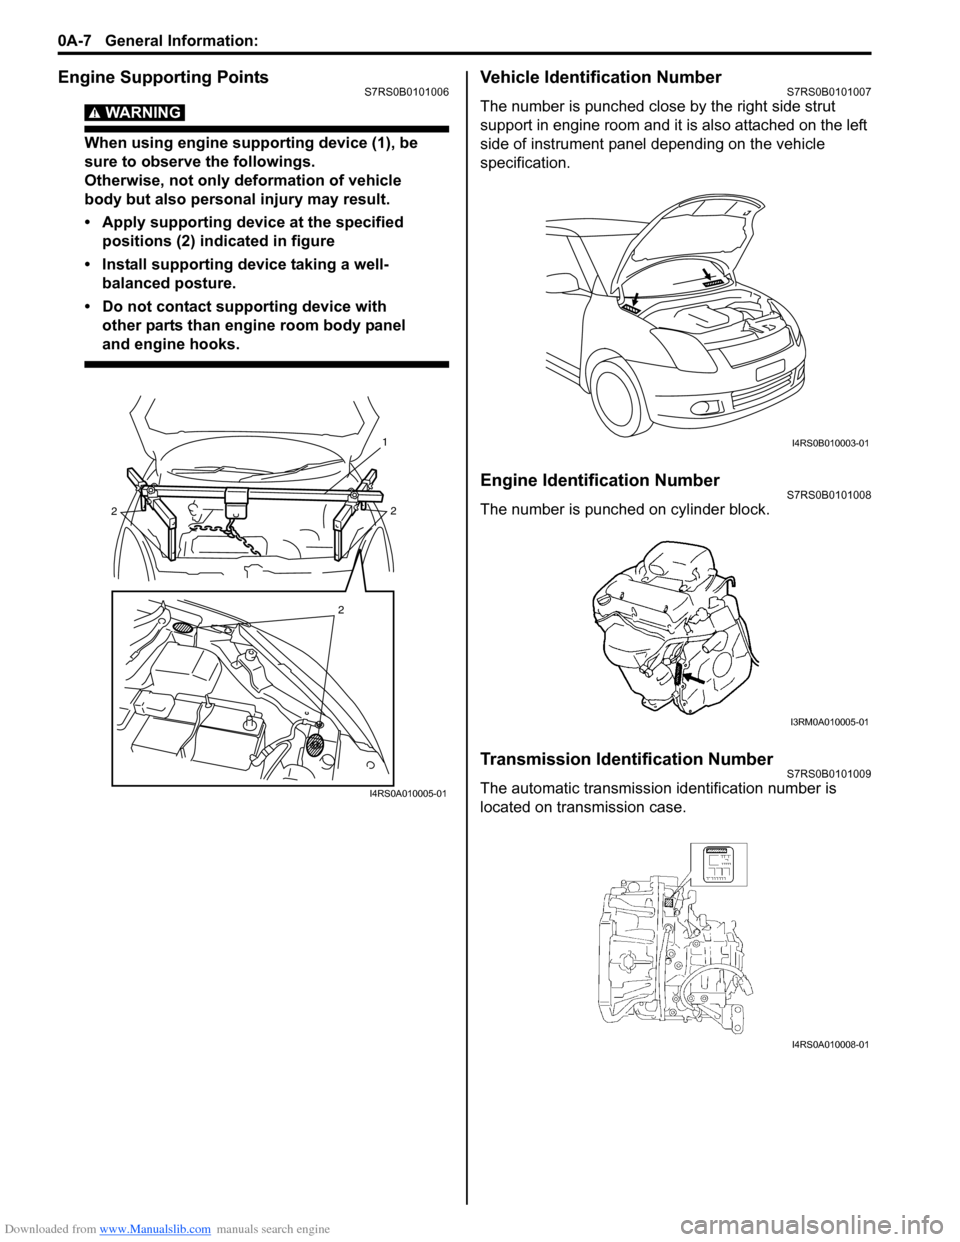 SUZUKI SWIFT 2007 2.G Service Workshop Manual Downloaded from www.Manualslib.com manuals search engine 0A-7 General Information: 
Engine Supporting PointsS7RS0B0101006
WARNING! 
When using engine supporting device (1), be 
sure to observe the fol